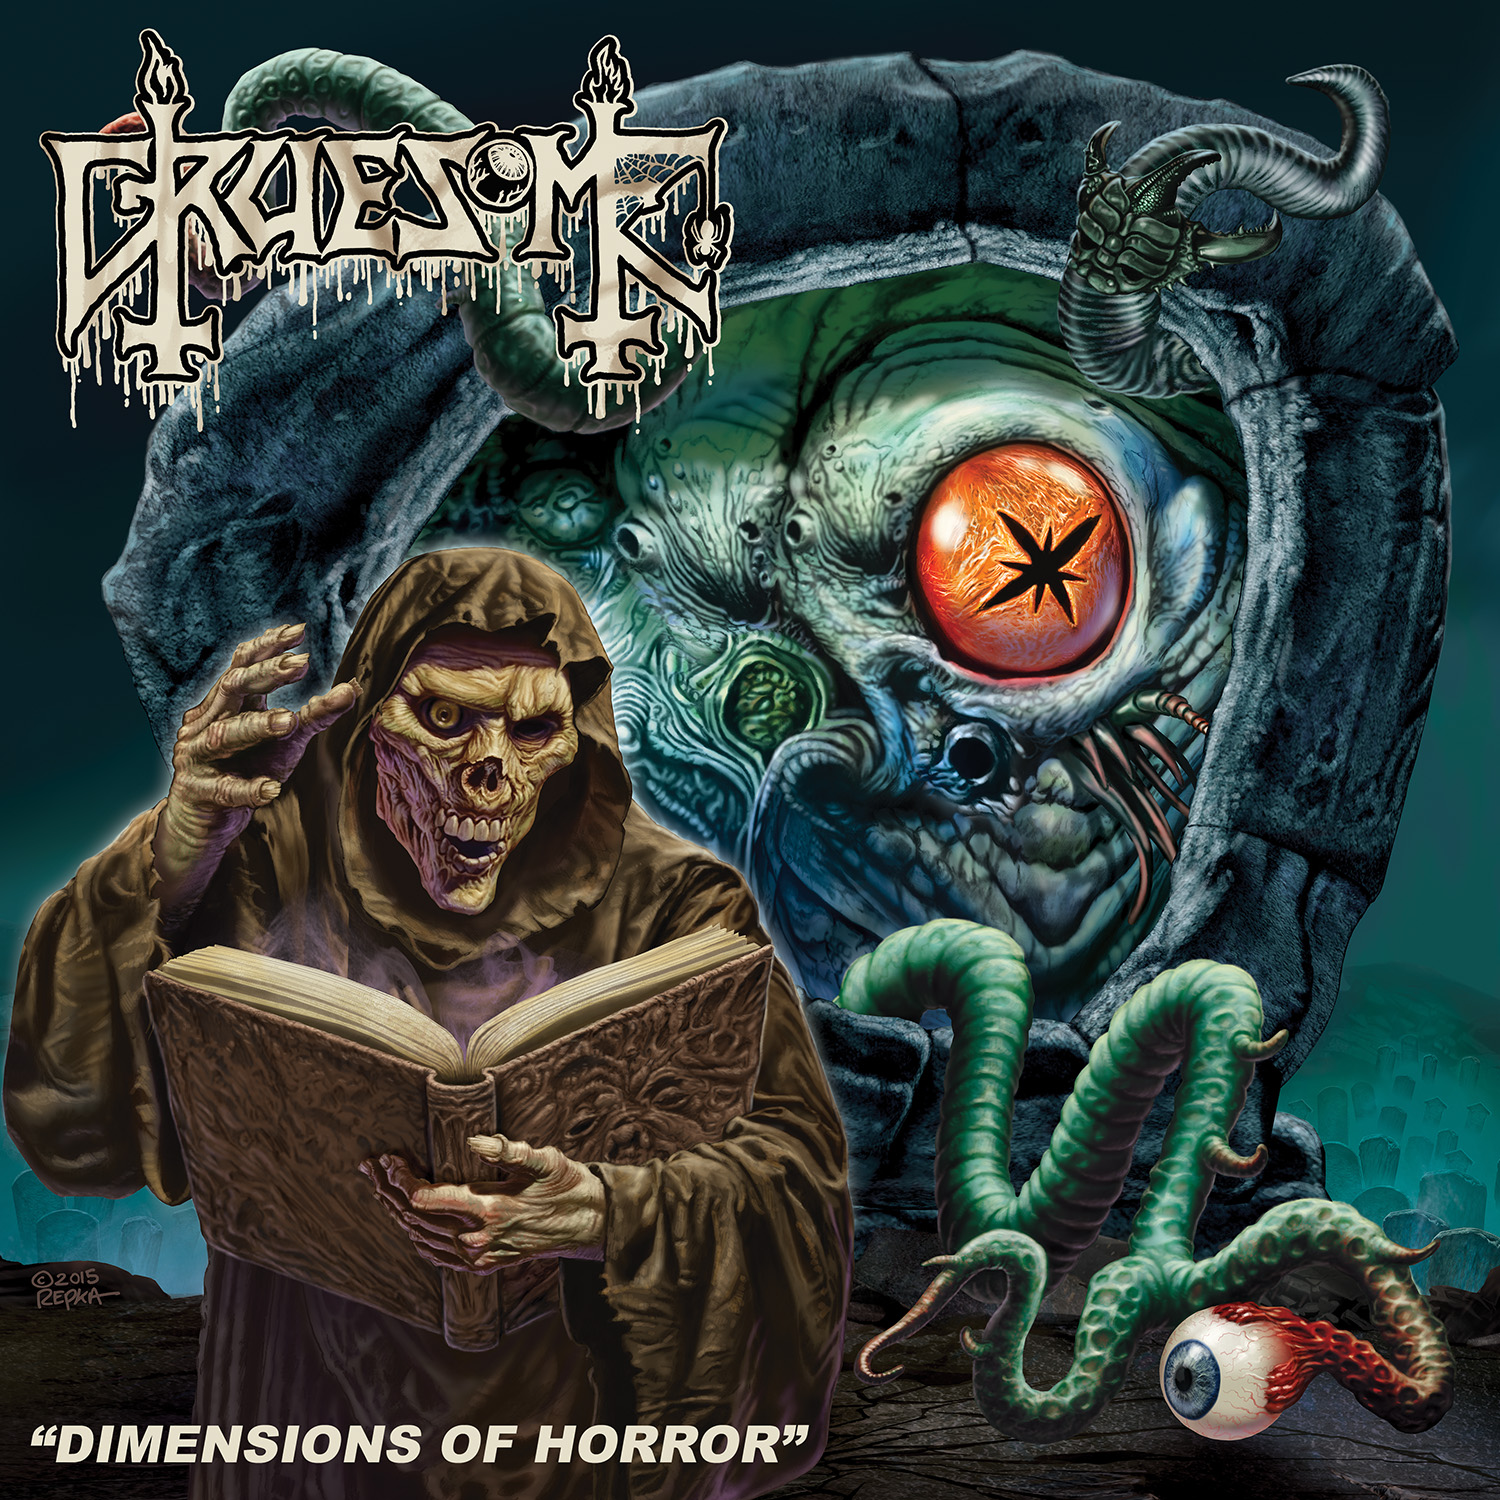 Gruesome – Dimensions Of Horror